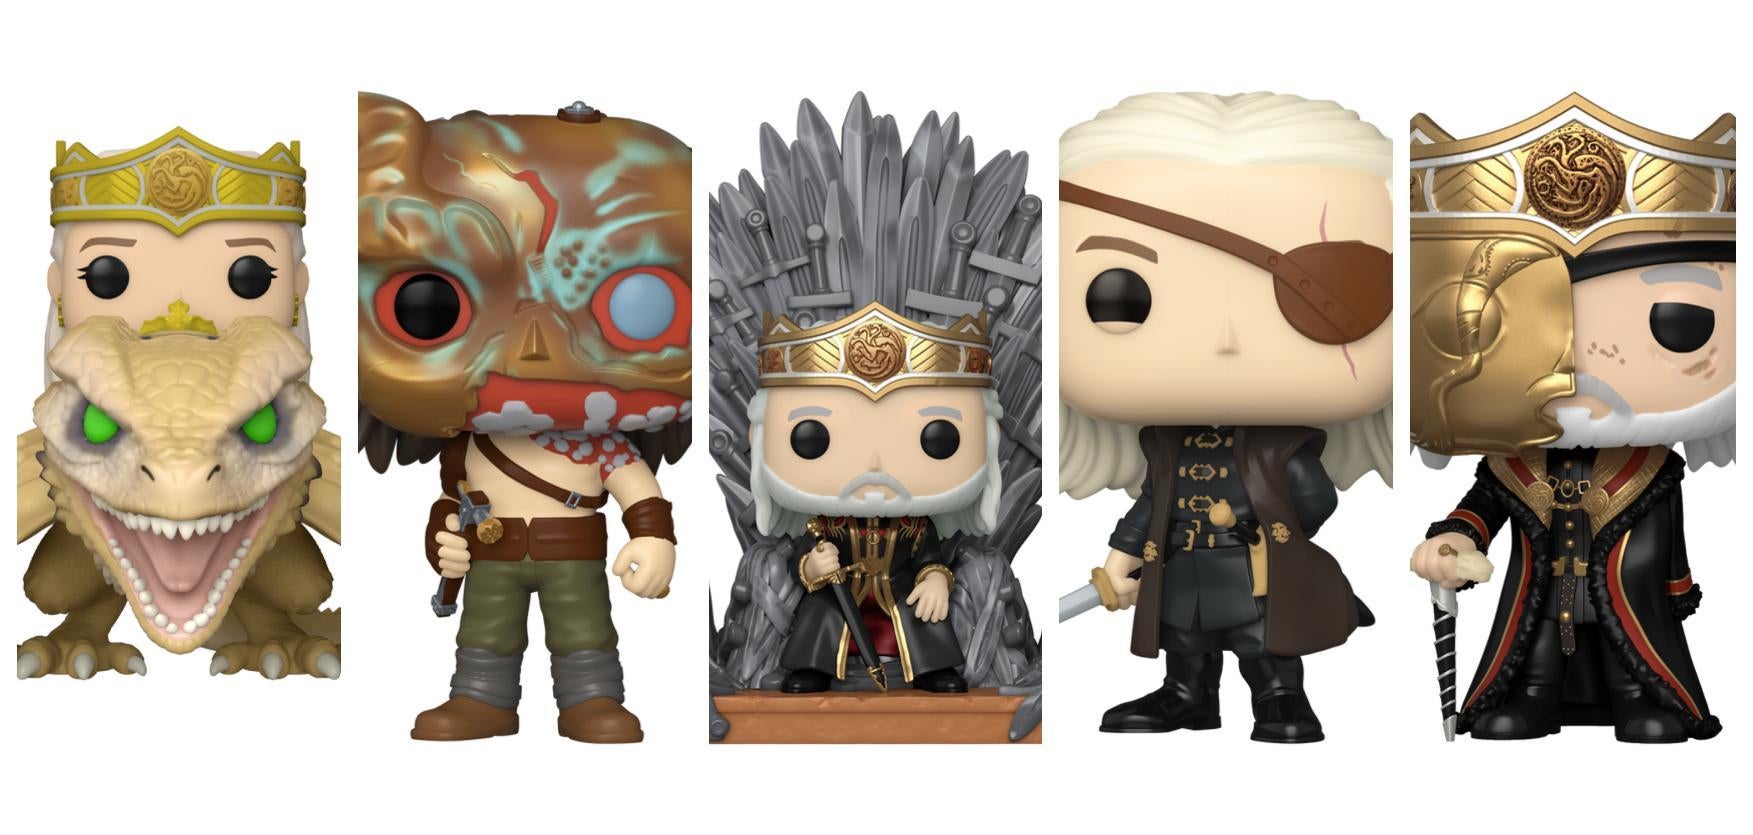 New Friends Funko Pops have arrived at